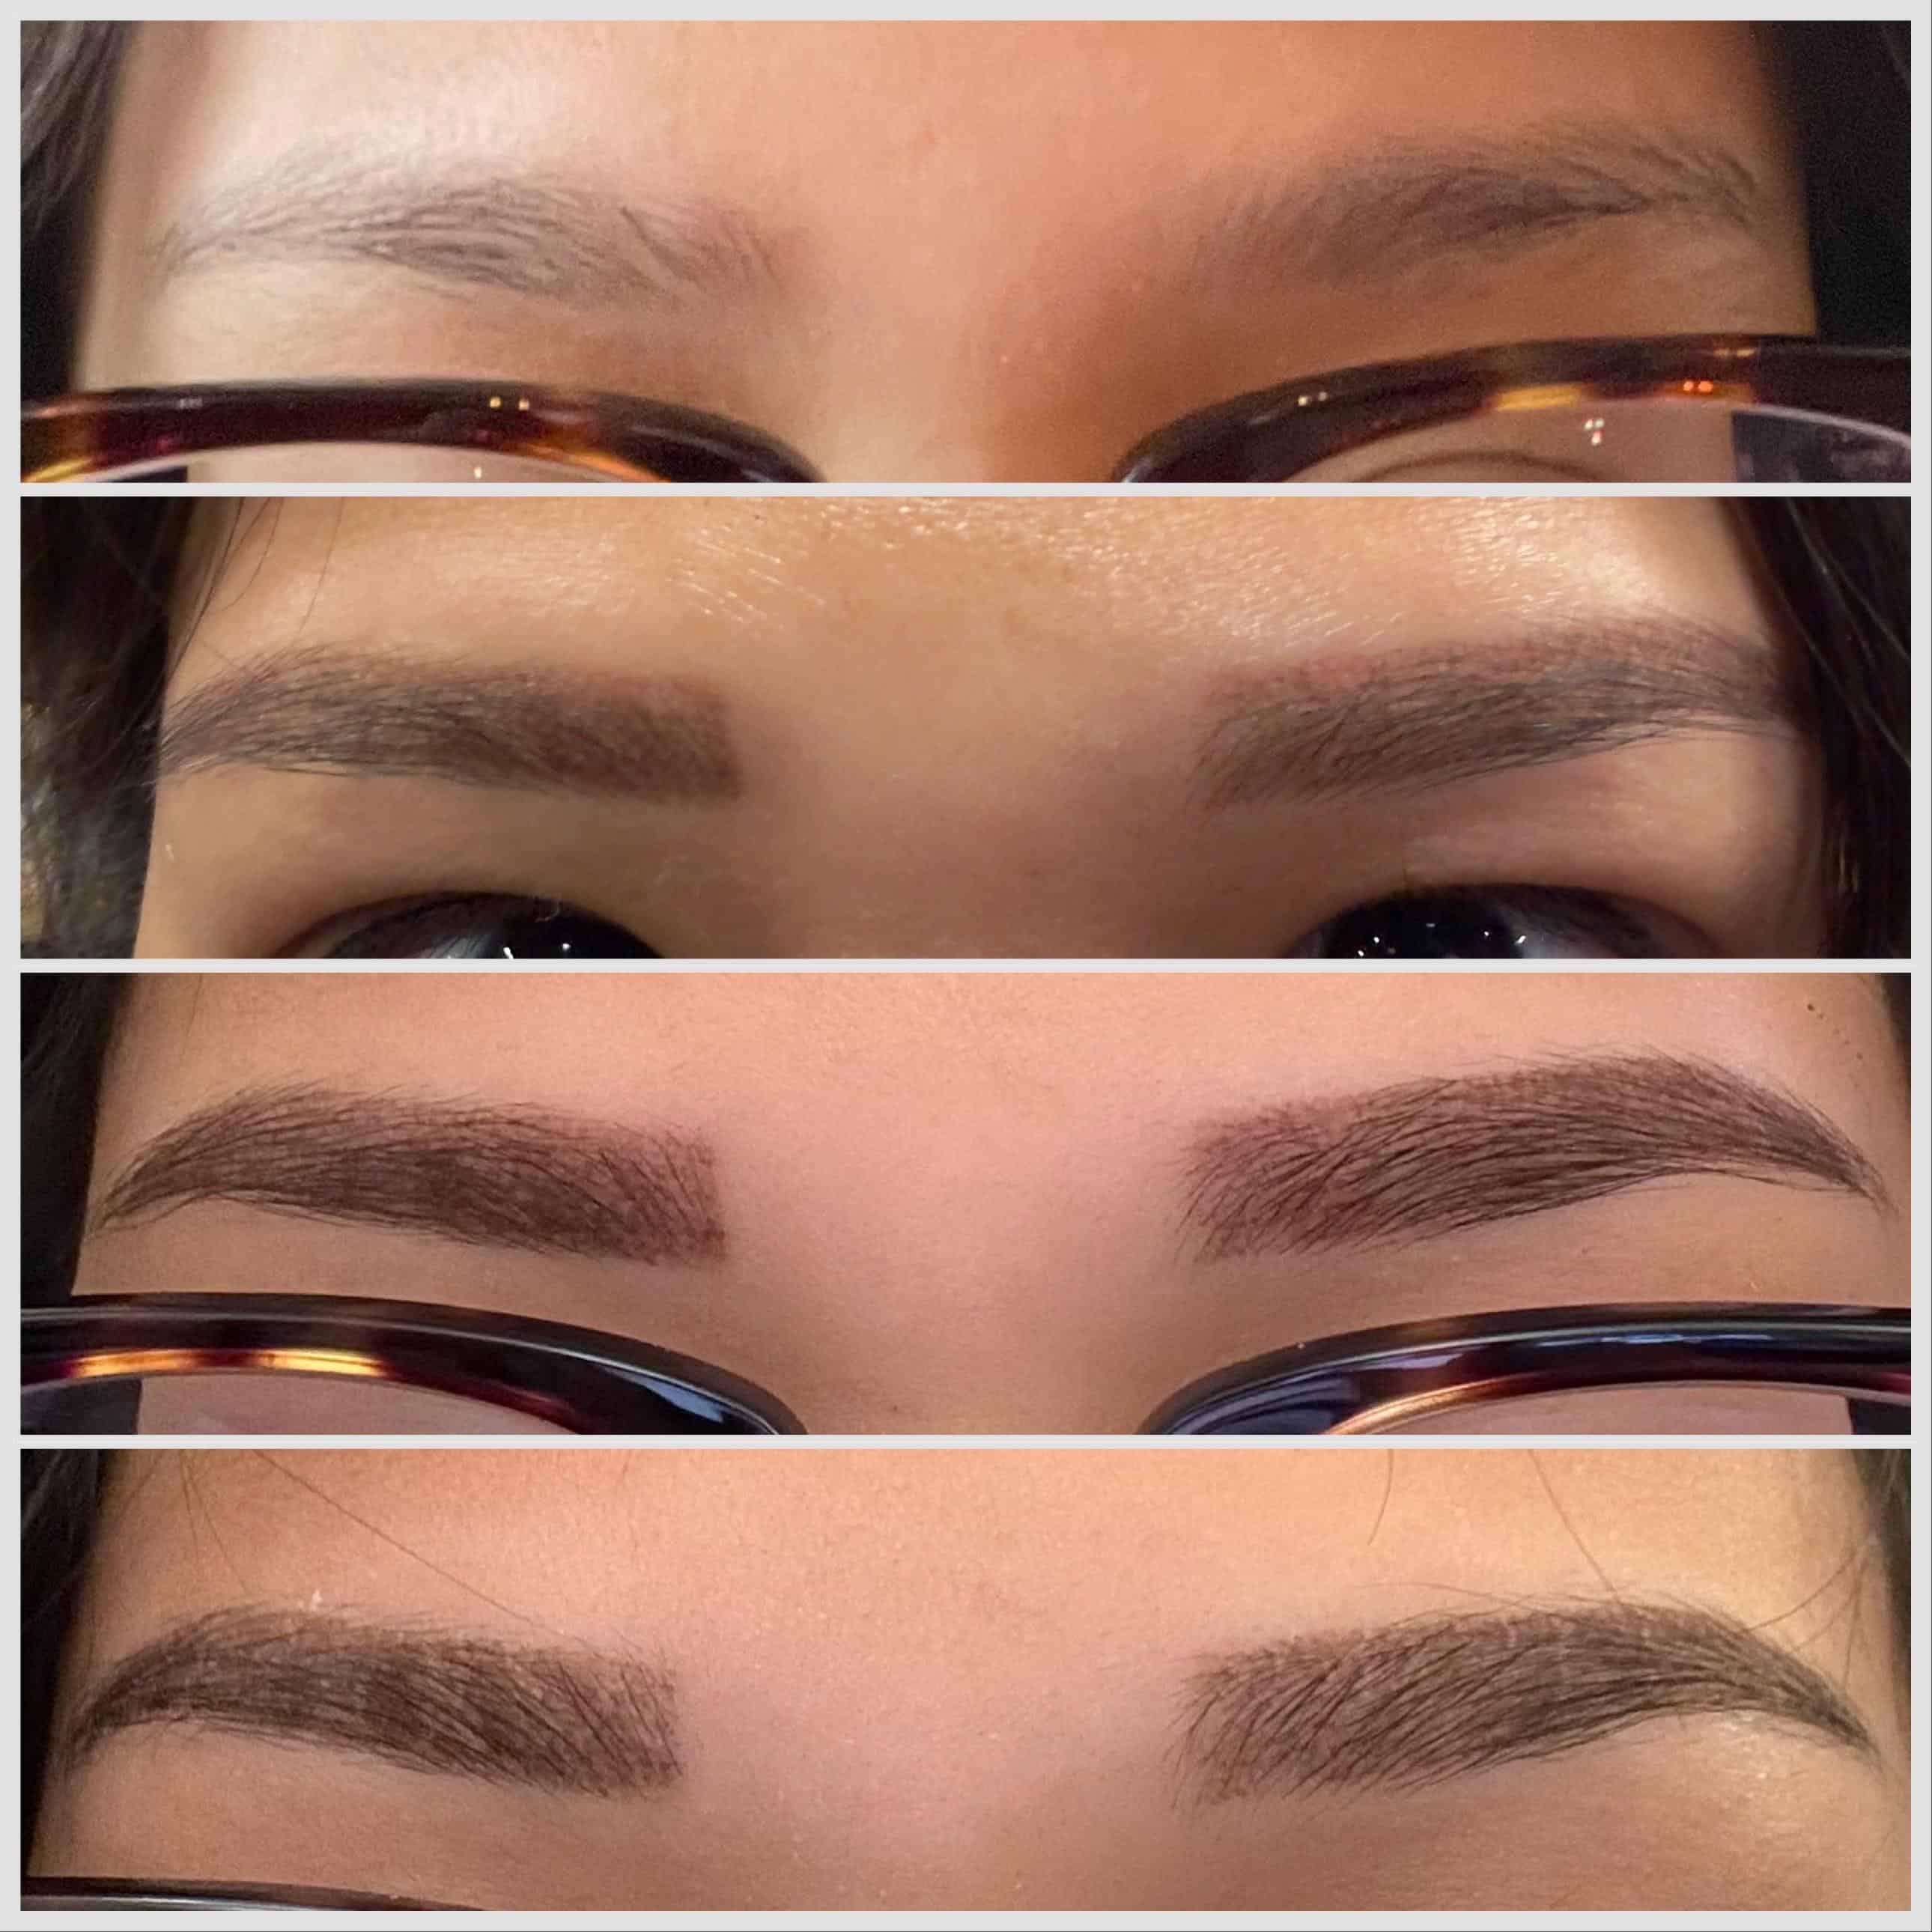 tattooed eyebrows pictures before and after